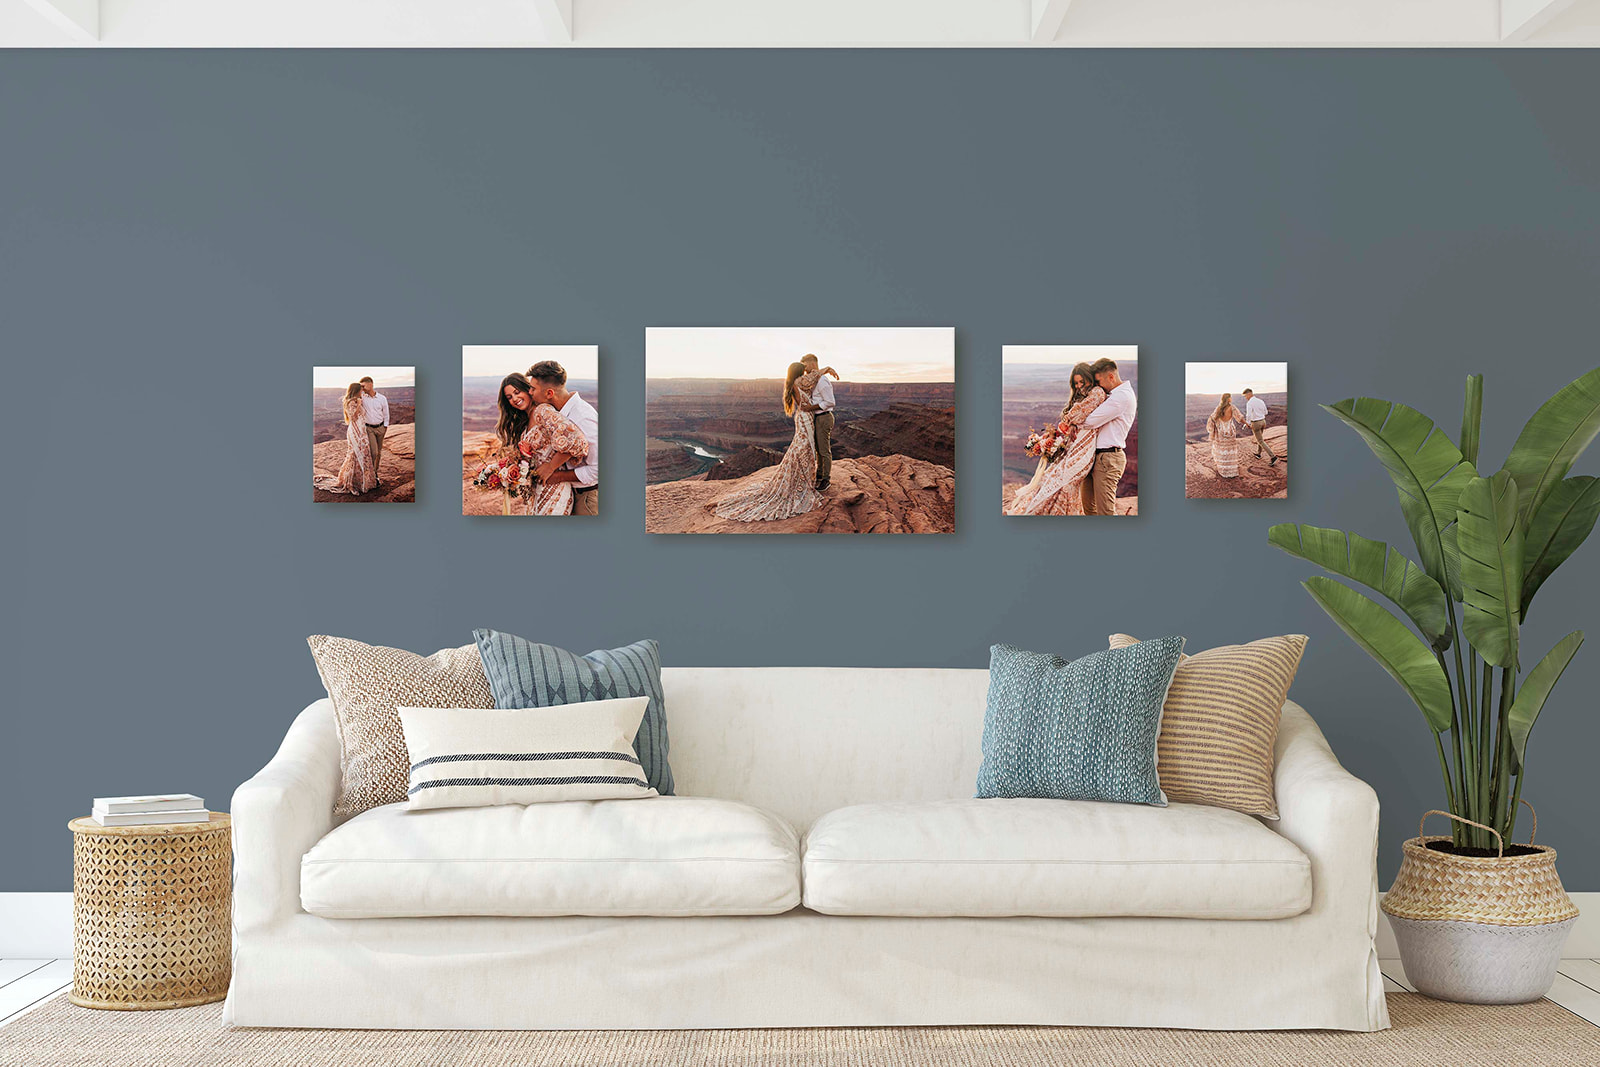 A living room wall featuring a series of five framed wedding photos above a white sofa with decorative pillows and a plant beside it.